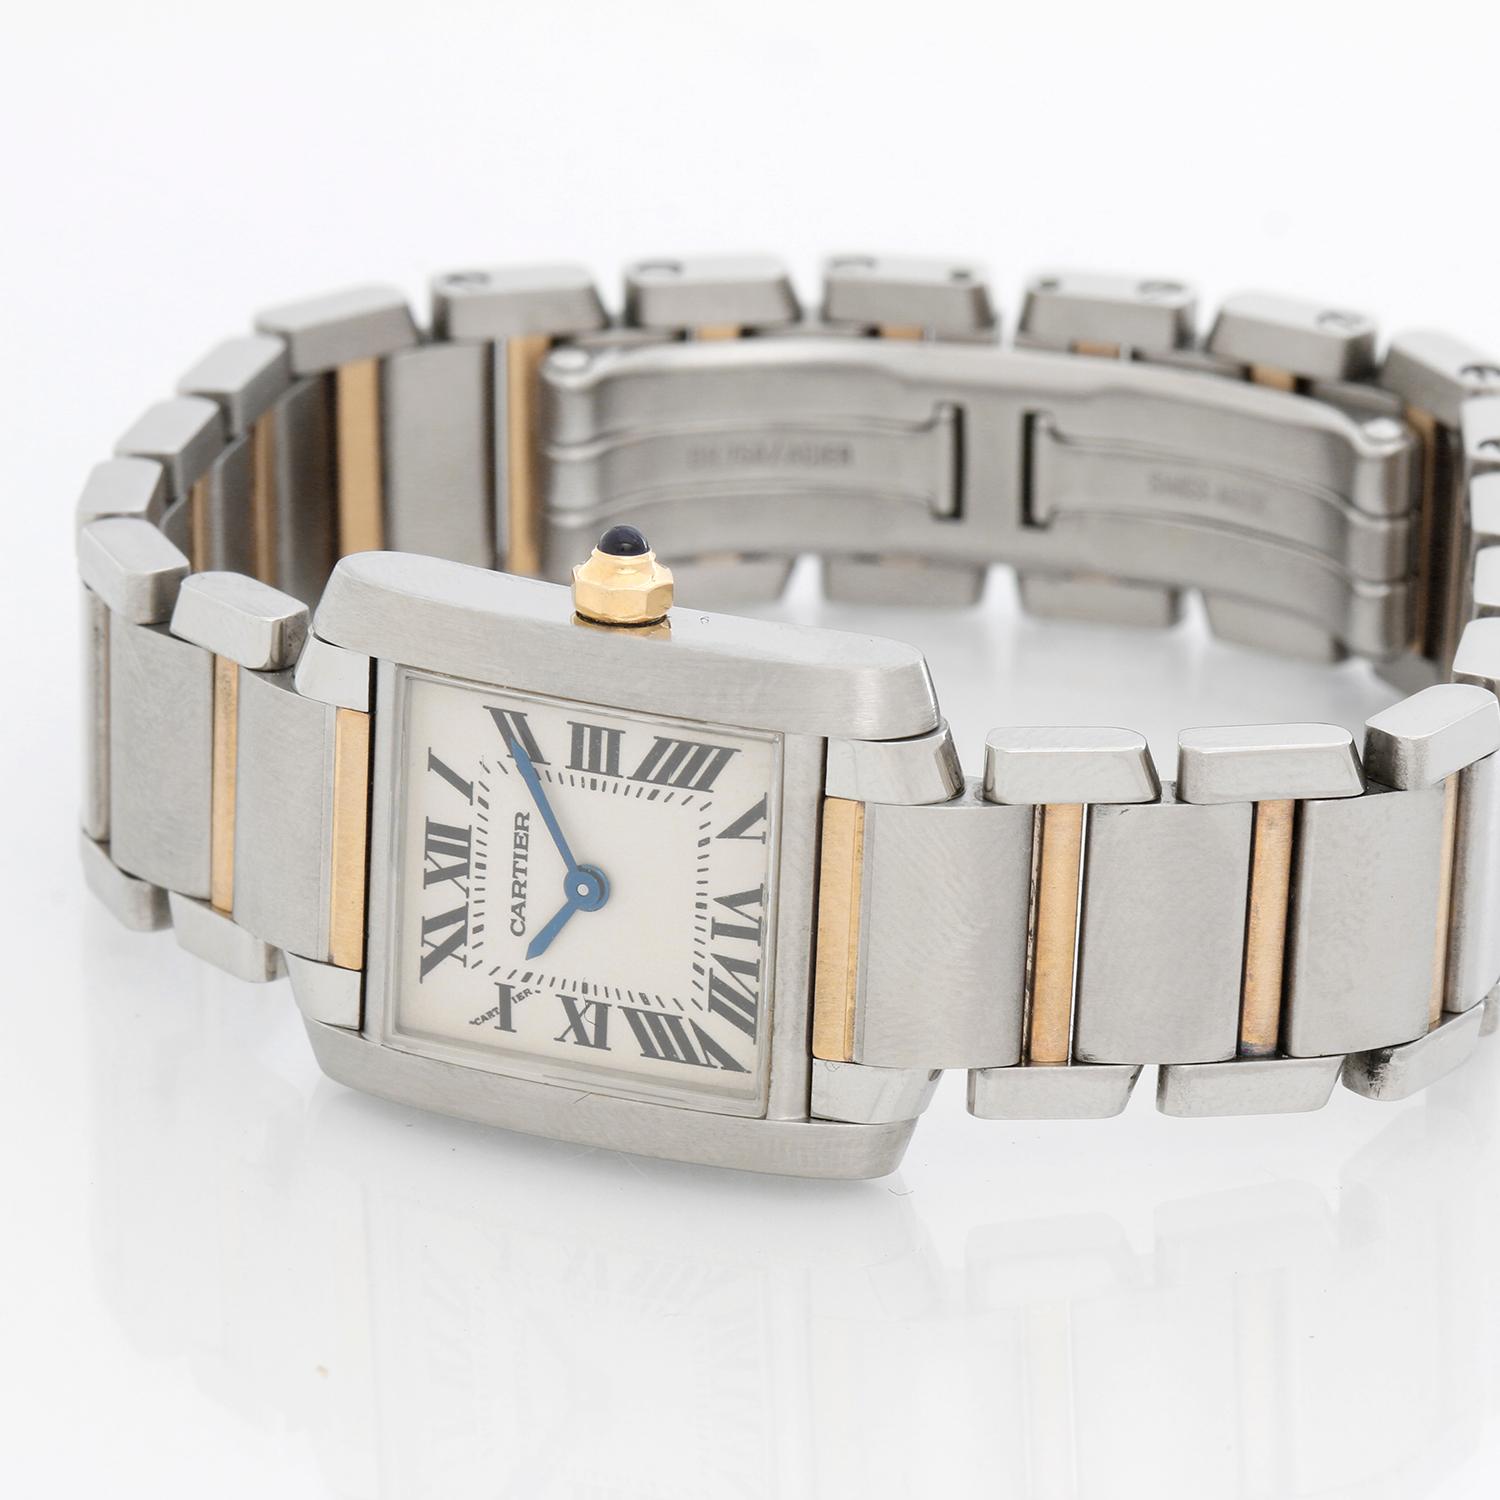 Cartier Tank Francaise Stainless  Steel and Yellow Gold  Ladies Watch W51008Q3 - Quartz. Stainless Steel (20 x 25mm ). Ivory colored dial with black Roman numerals. 2-Tone Cartier Tank Francaise bracelet with deployant clasp.. Pre-owned with Cartier